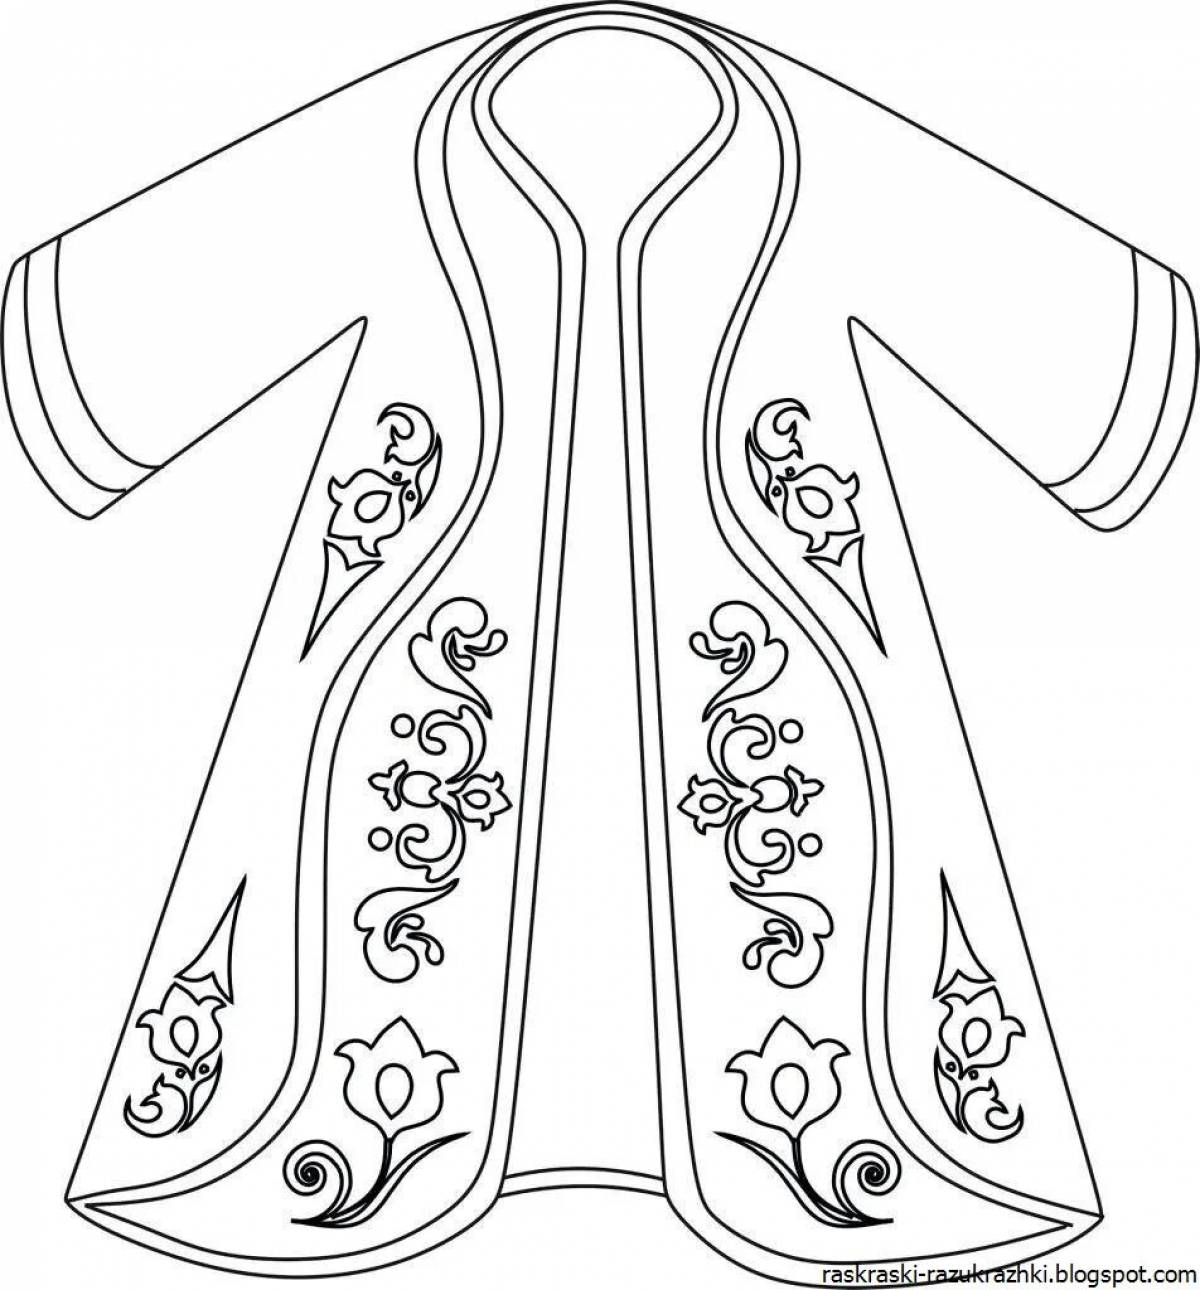 Animated camisole coloring page